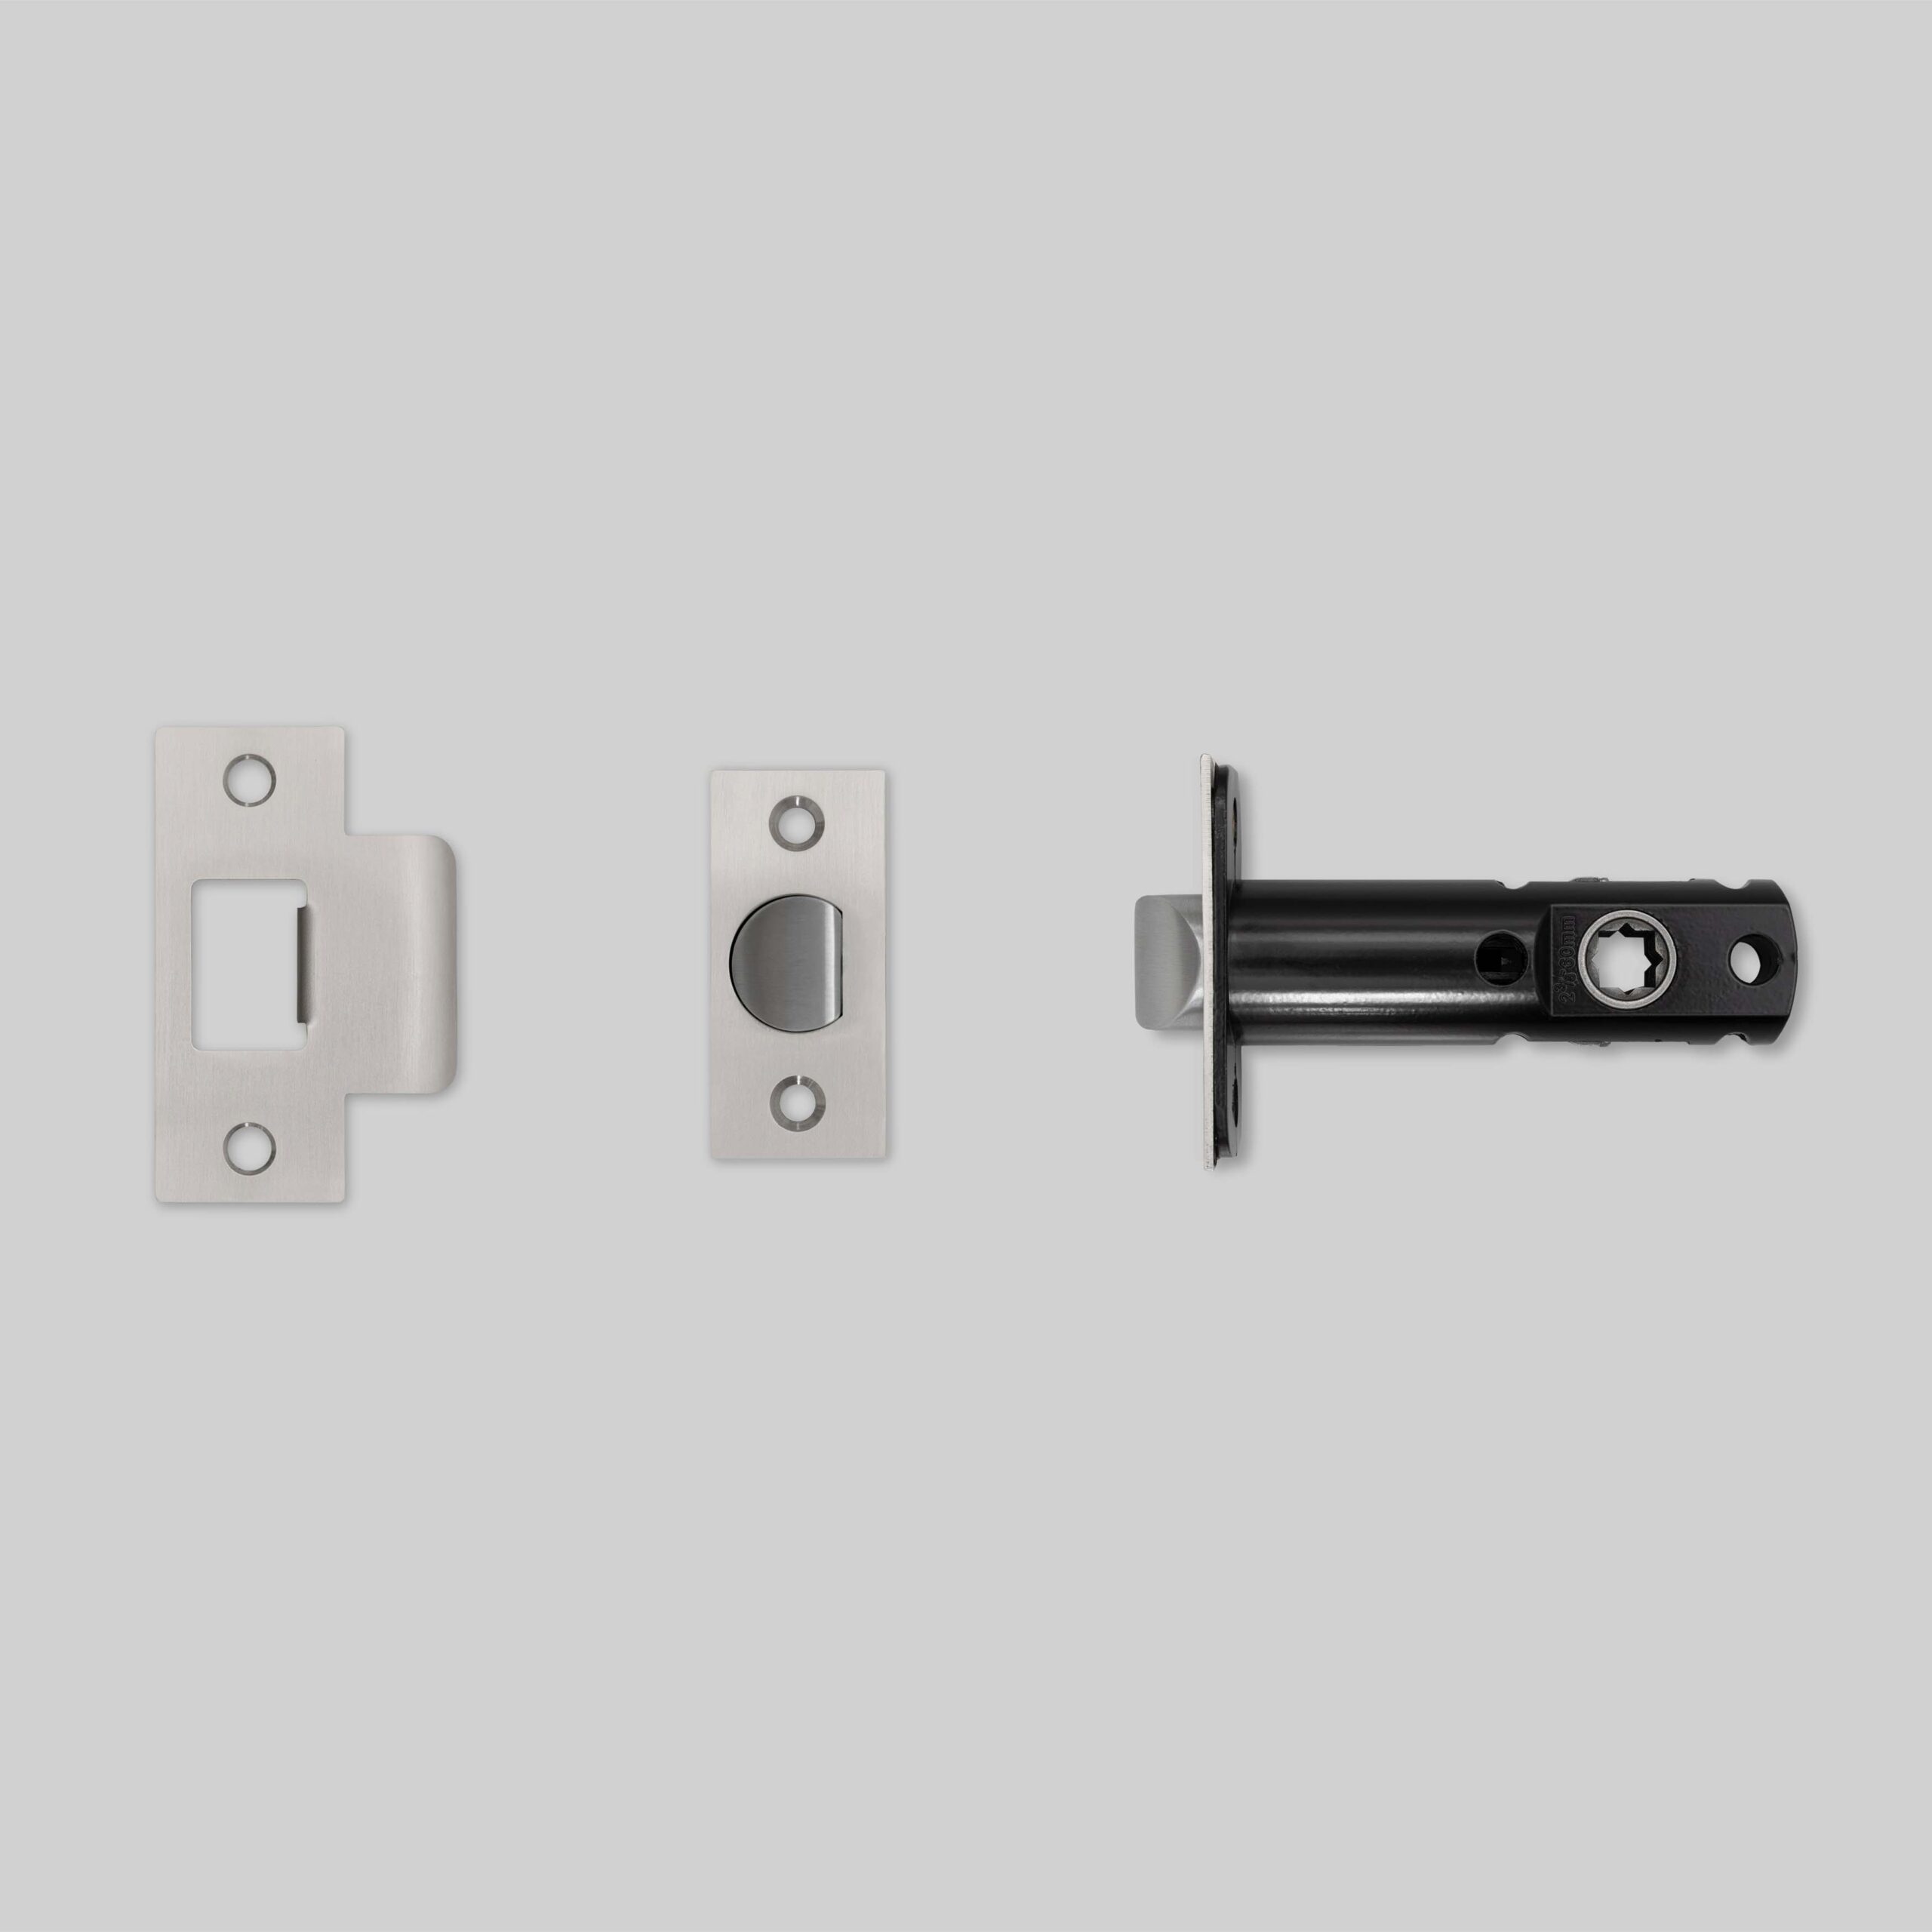 Strike Plate SINGLE use with Tubular Mortice Door Latch Polished Stainless Steel 